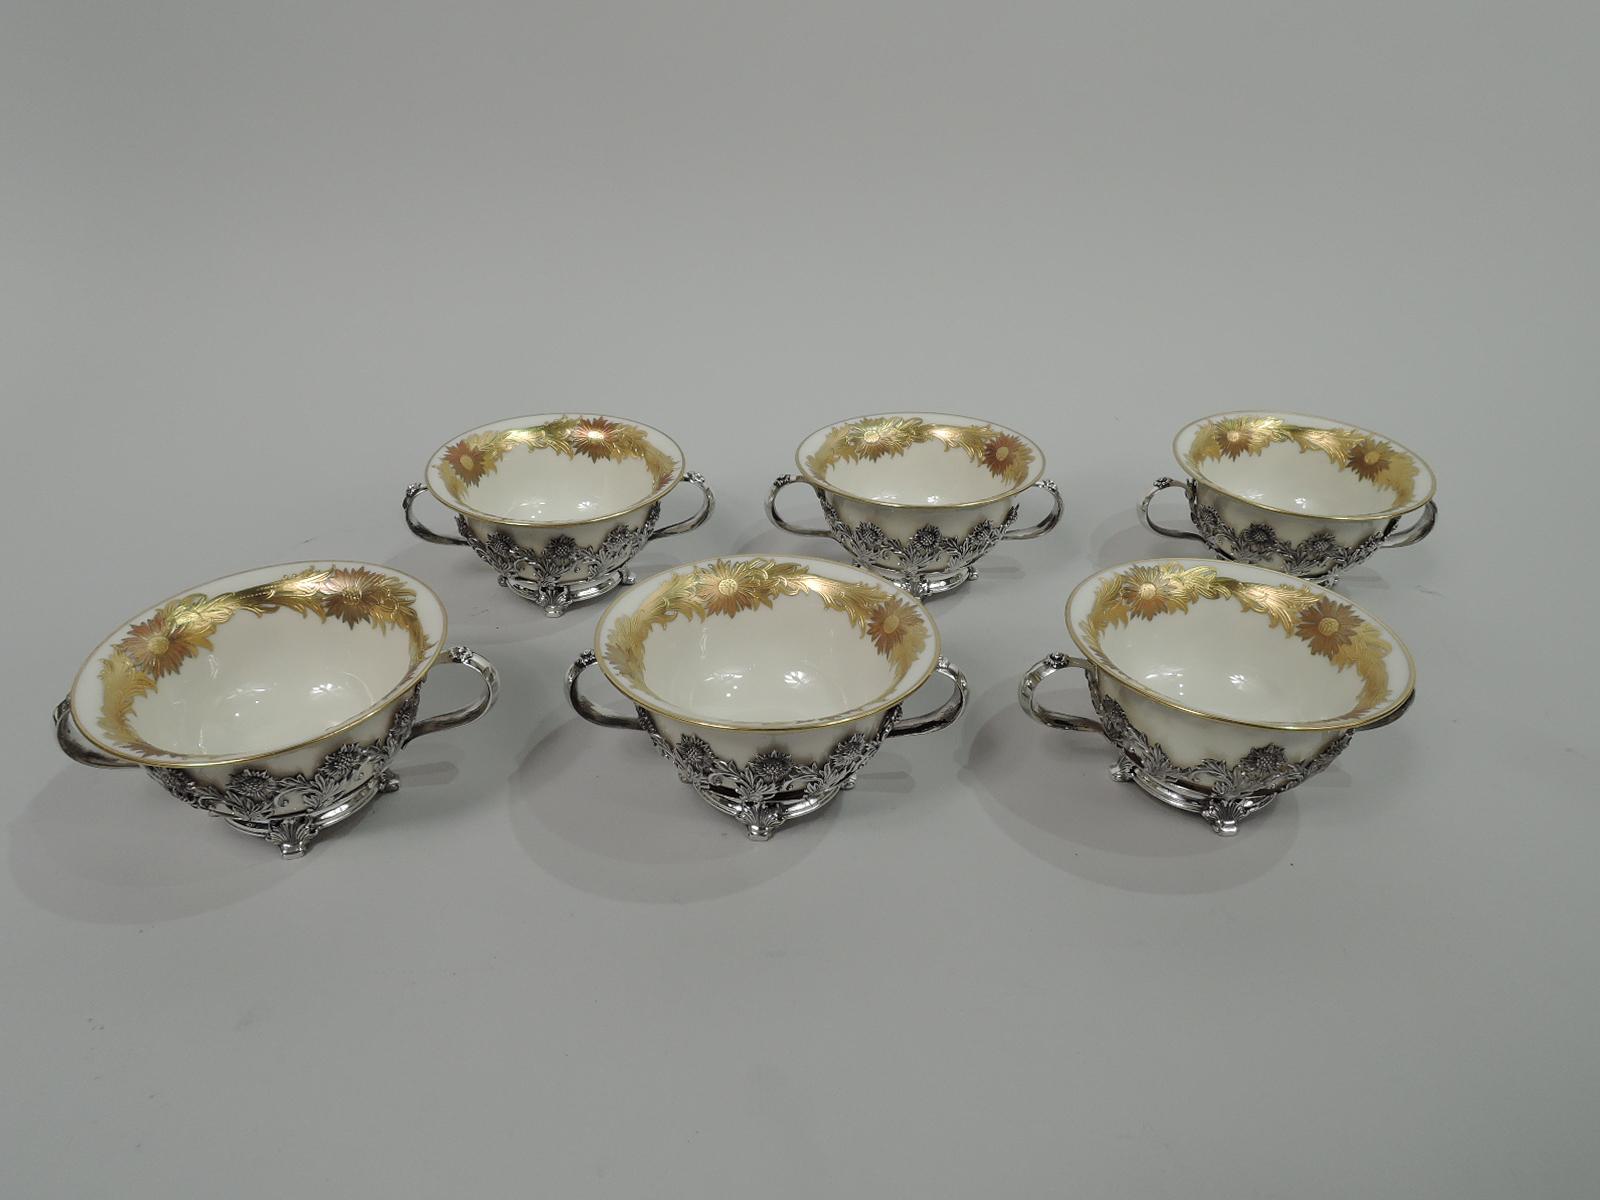 Set of 6 Chrysanthemum sterling silver bouillon bowl holders. Made by Tiffany & Co. in New York, ca 1910. Each: Curved and open sides comprising joined stem flowers. Flower-capped looping side handles. Foot ring with 4 scallop-shell supports. Fully